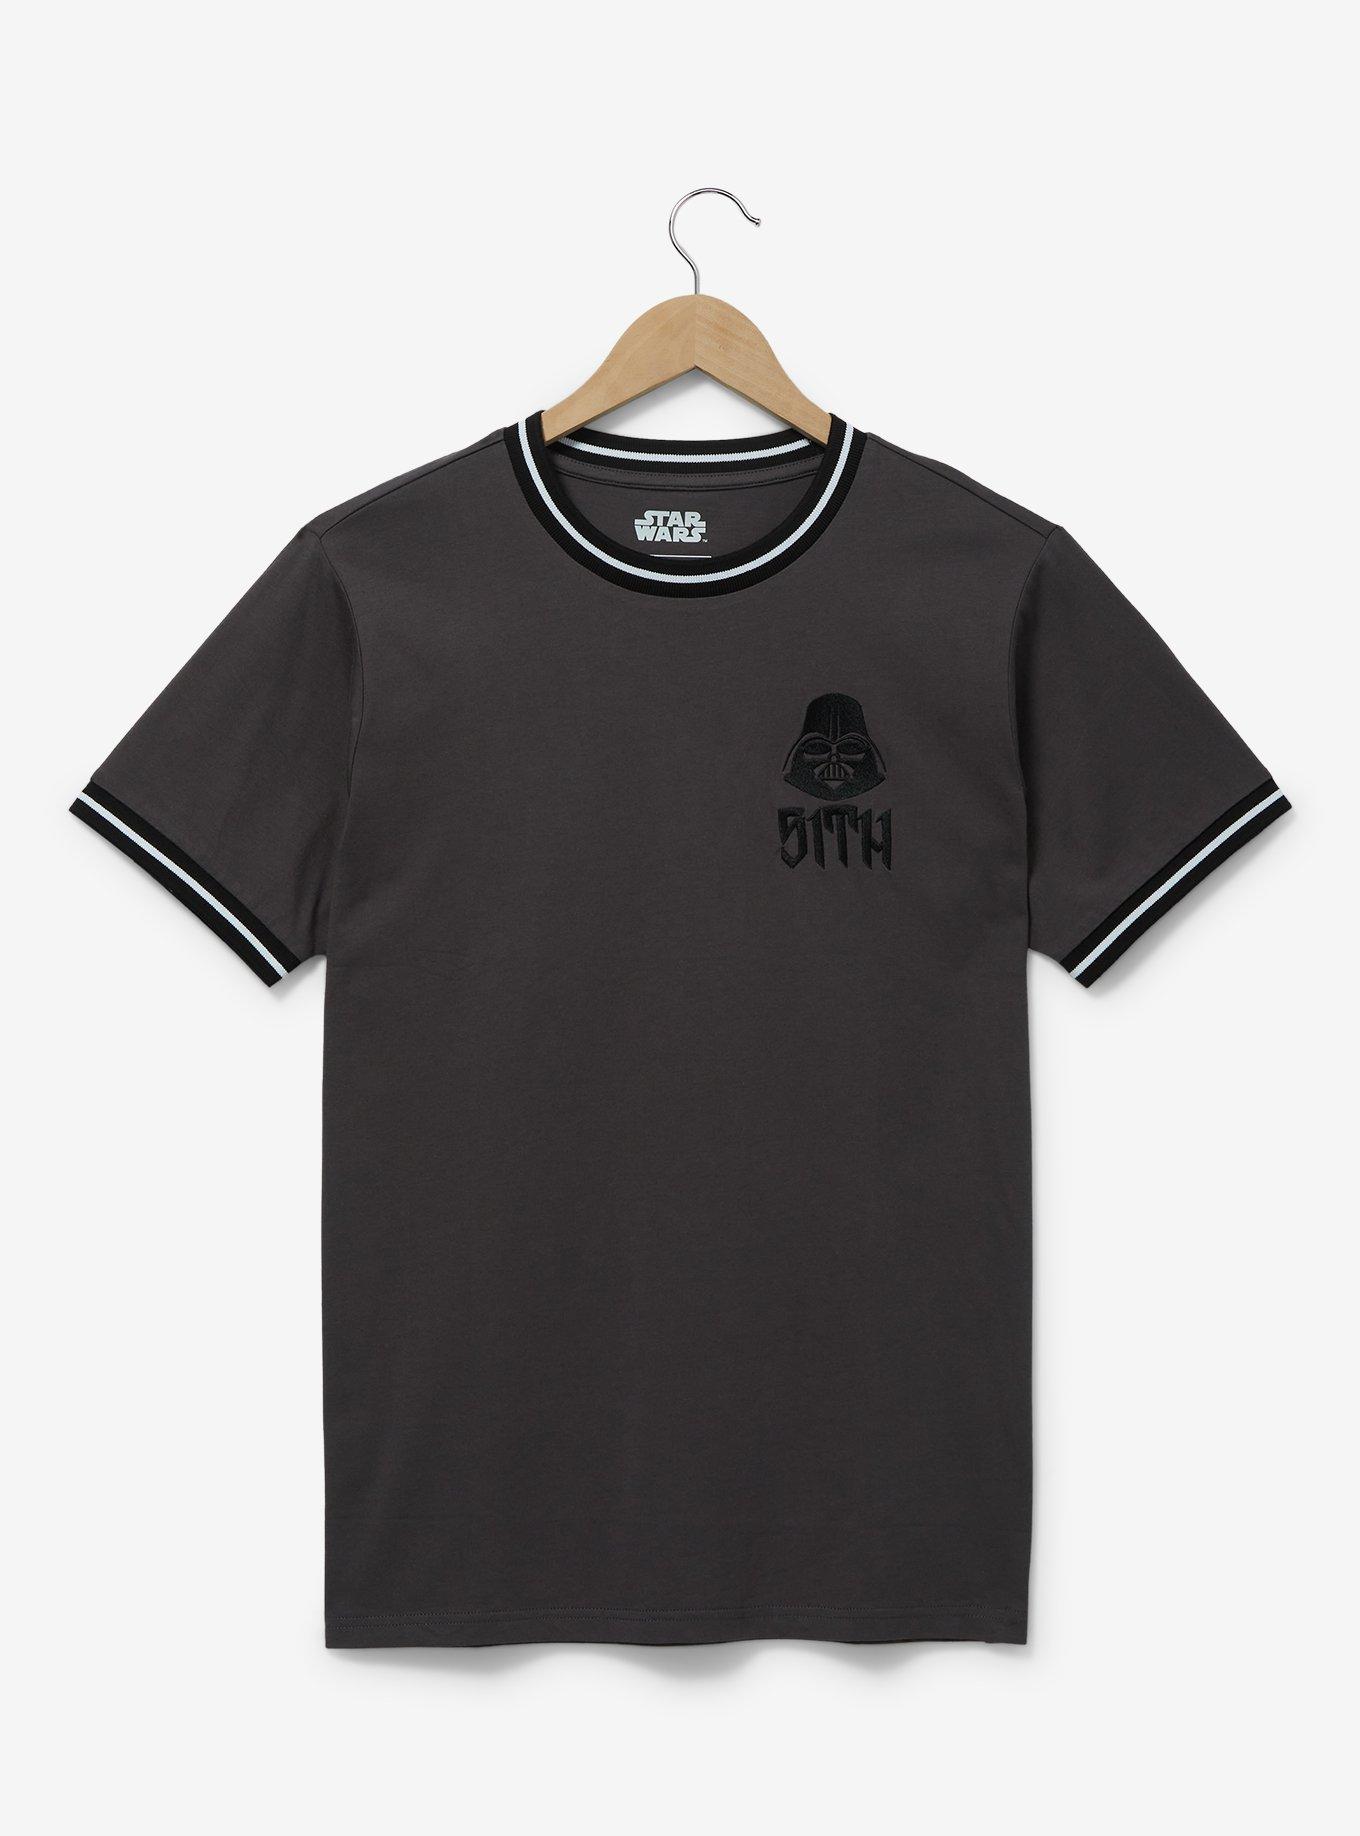 Star Wars Darth Vader Sith Ringer T-Shirt - BoxLunch Exclusive | BoxLunch